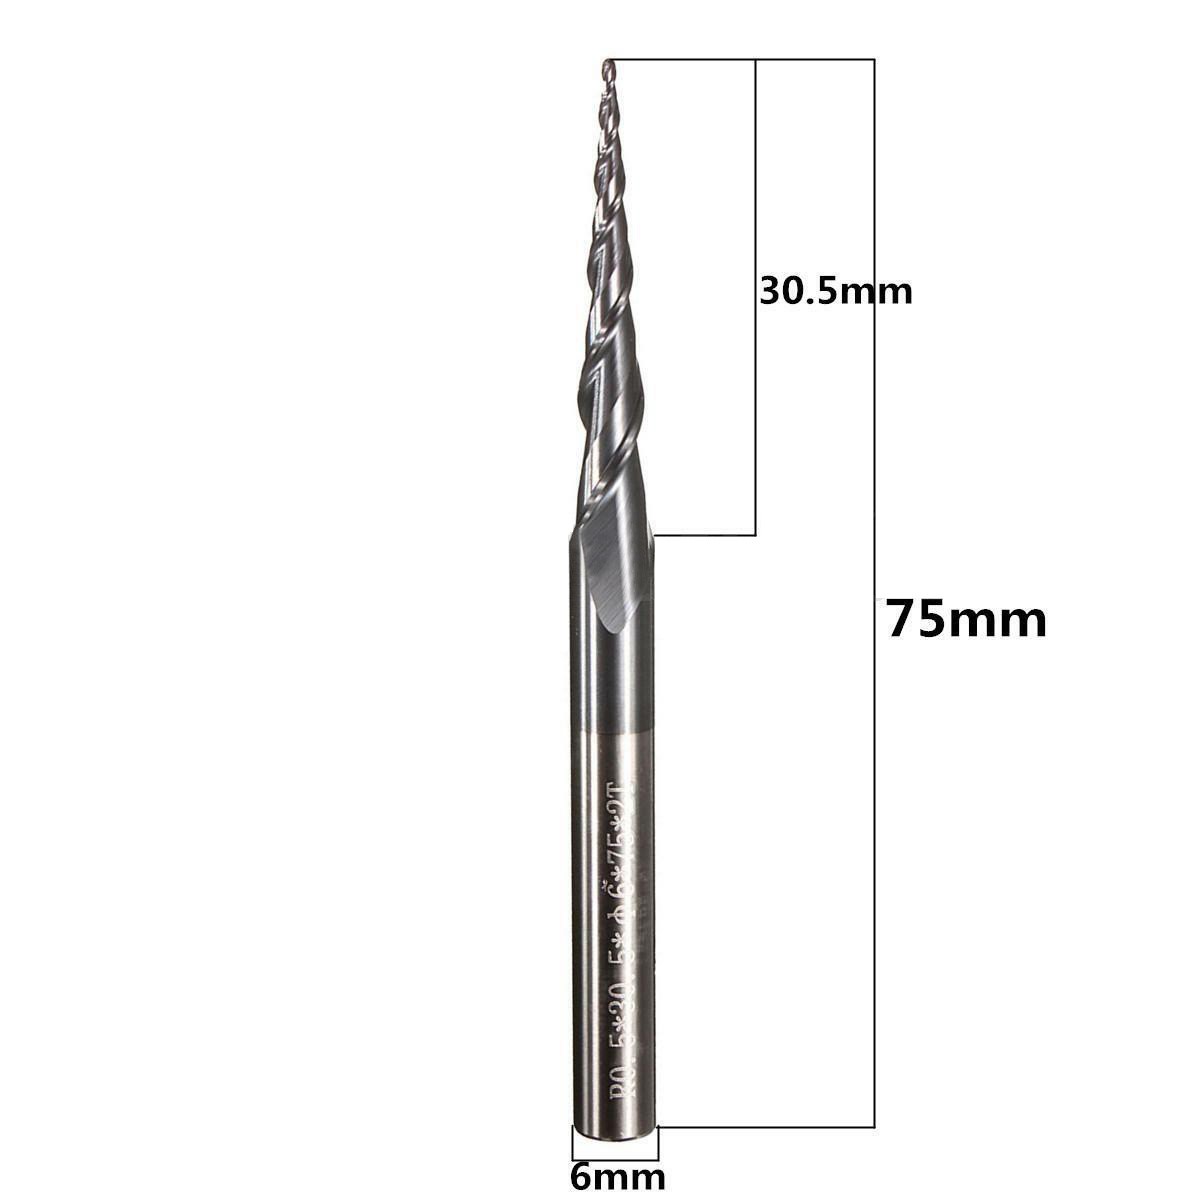 R0.5*D6*30.5*75L 2-Flute HRC55 Taper Ball Nose End Mill CNC Drill Bit Tool - image 2 of 9